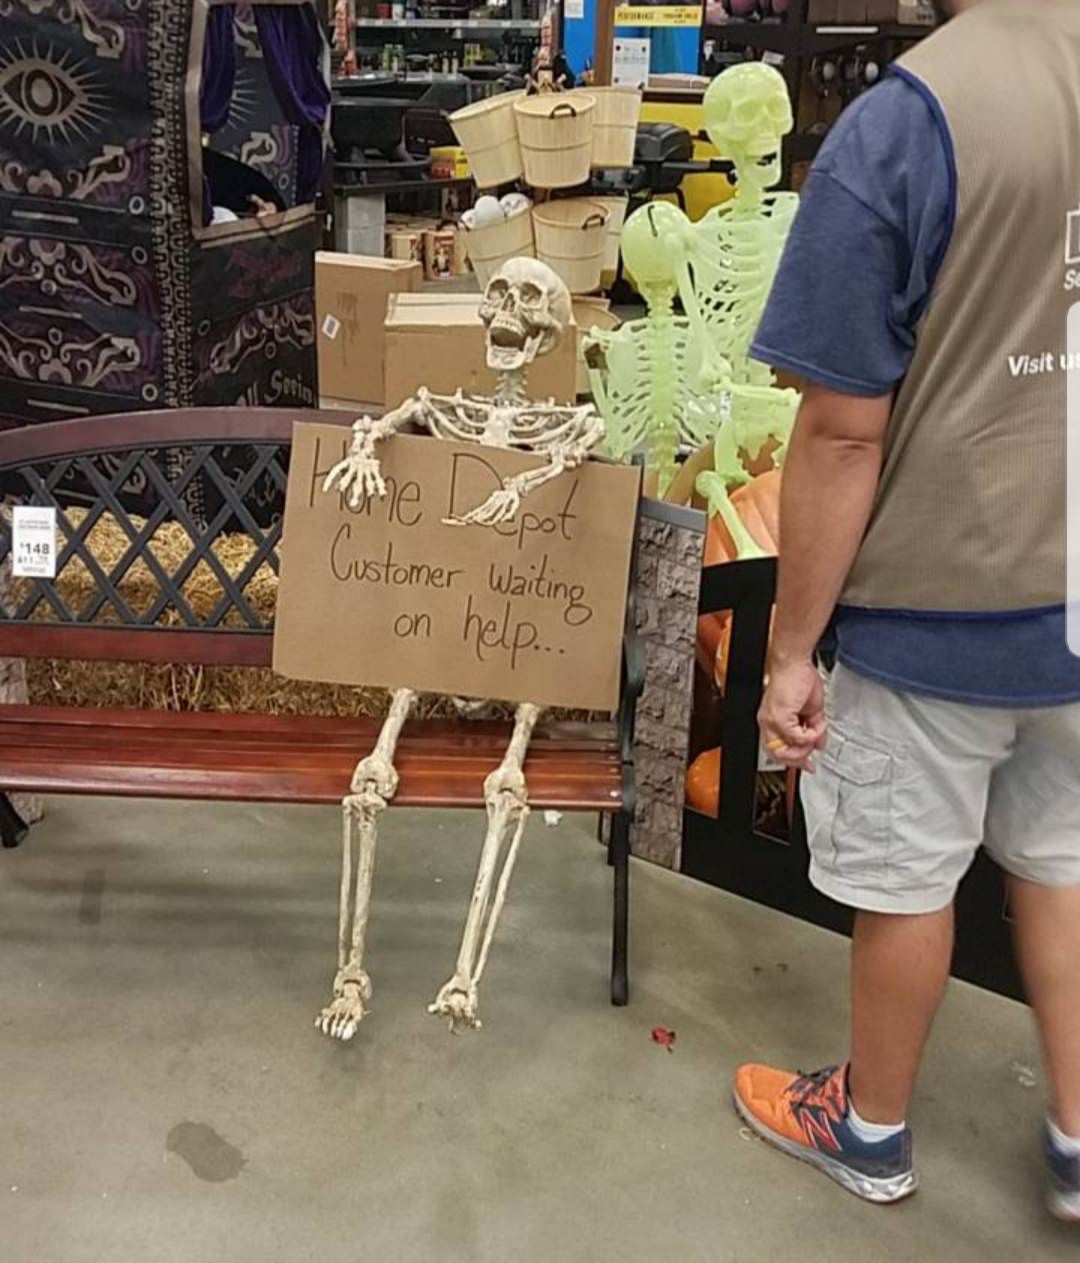 So I was at lowes today...